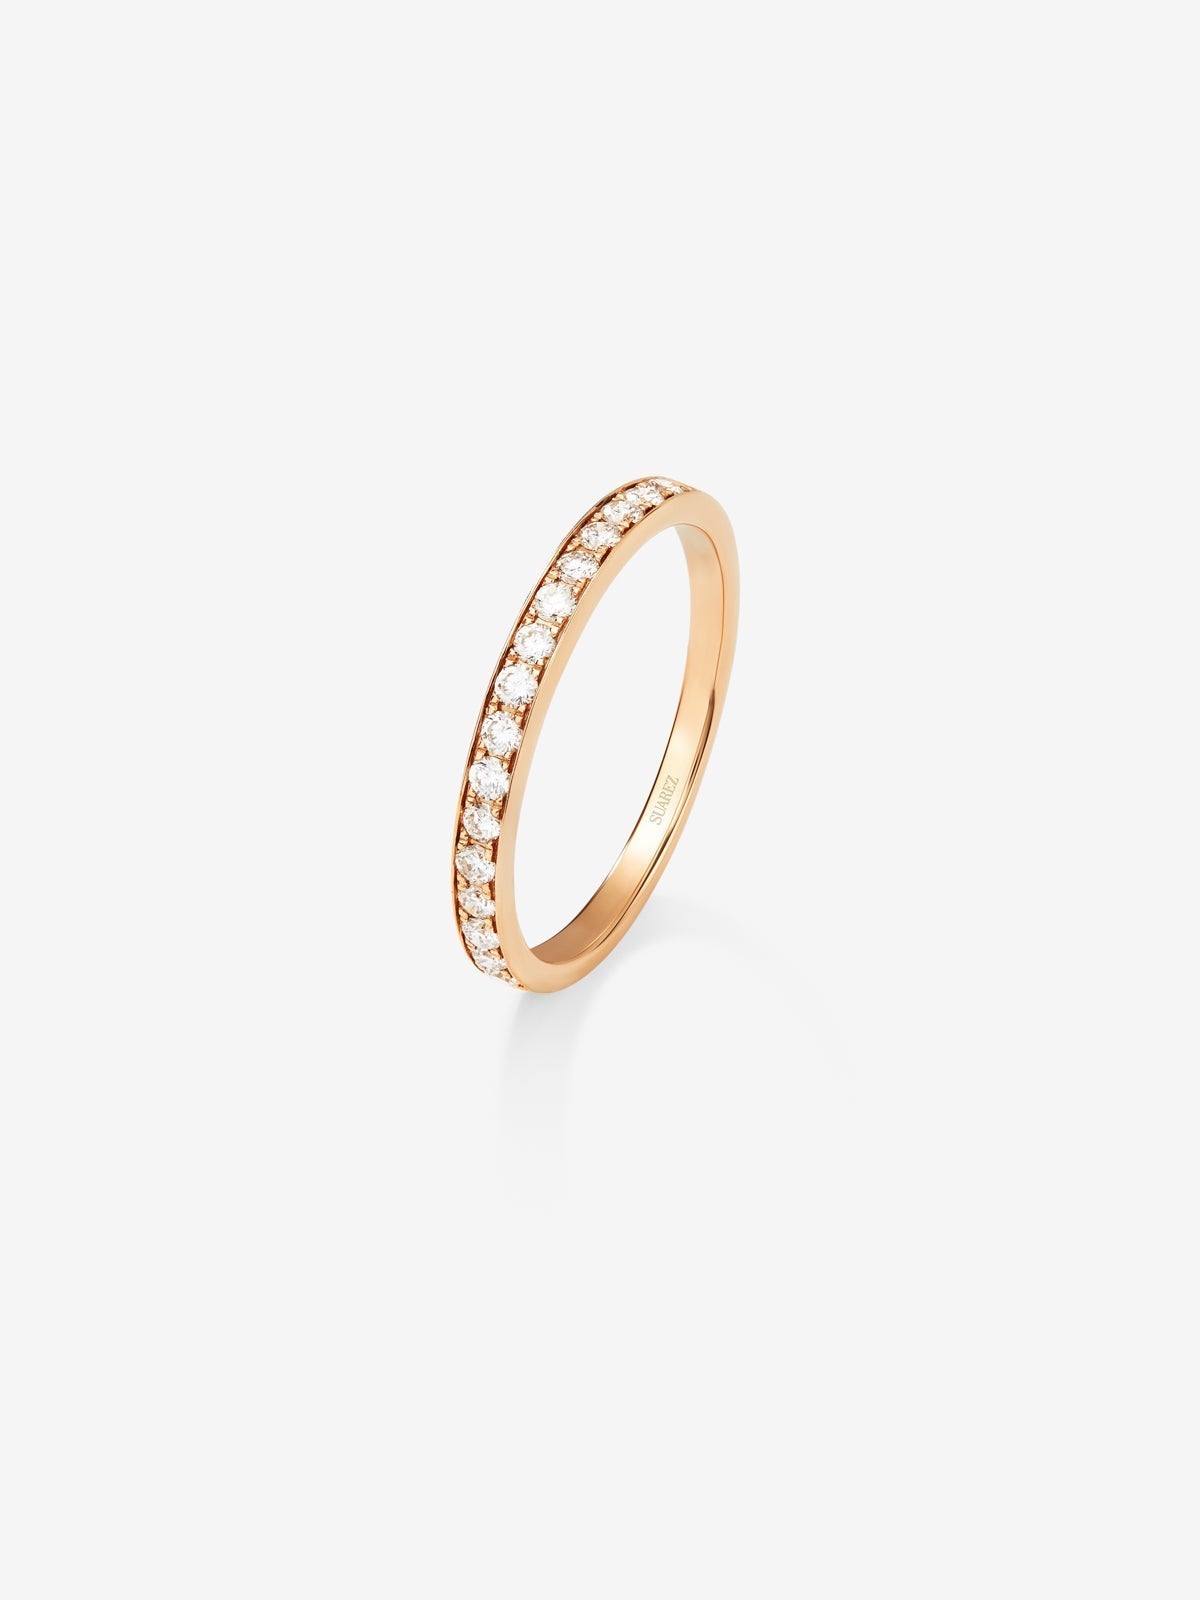 Half ring in 18K rose gold with 20 brilliant-cut diamonds with a total of 0.15 cts